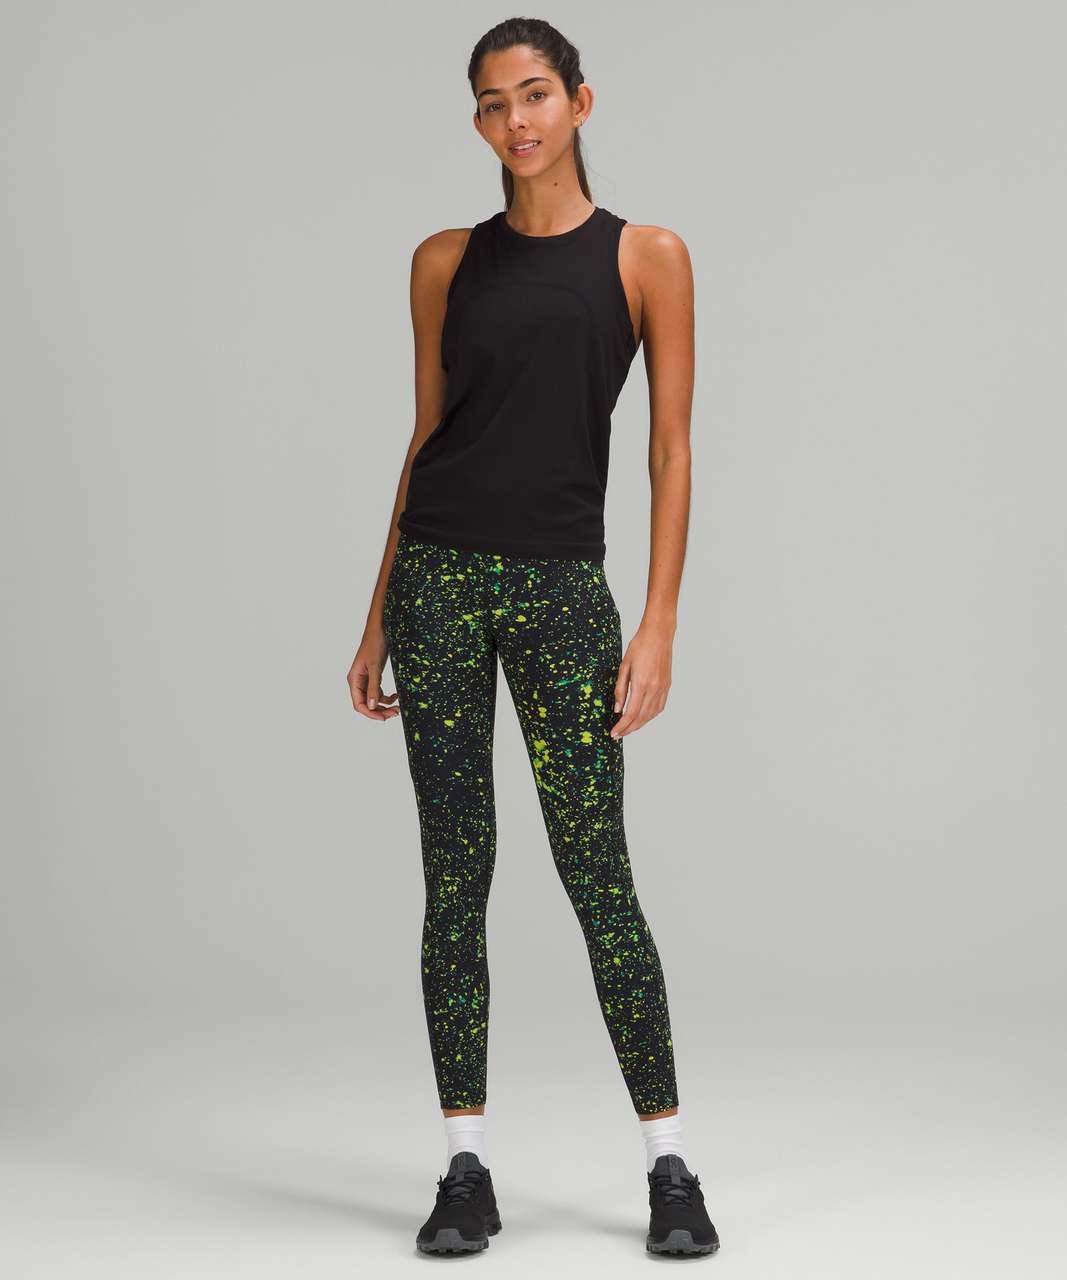 Lululemon Fast and Free High-Rise Tight 25" - Sparks Fly Multi